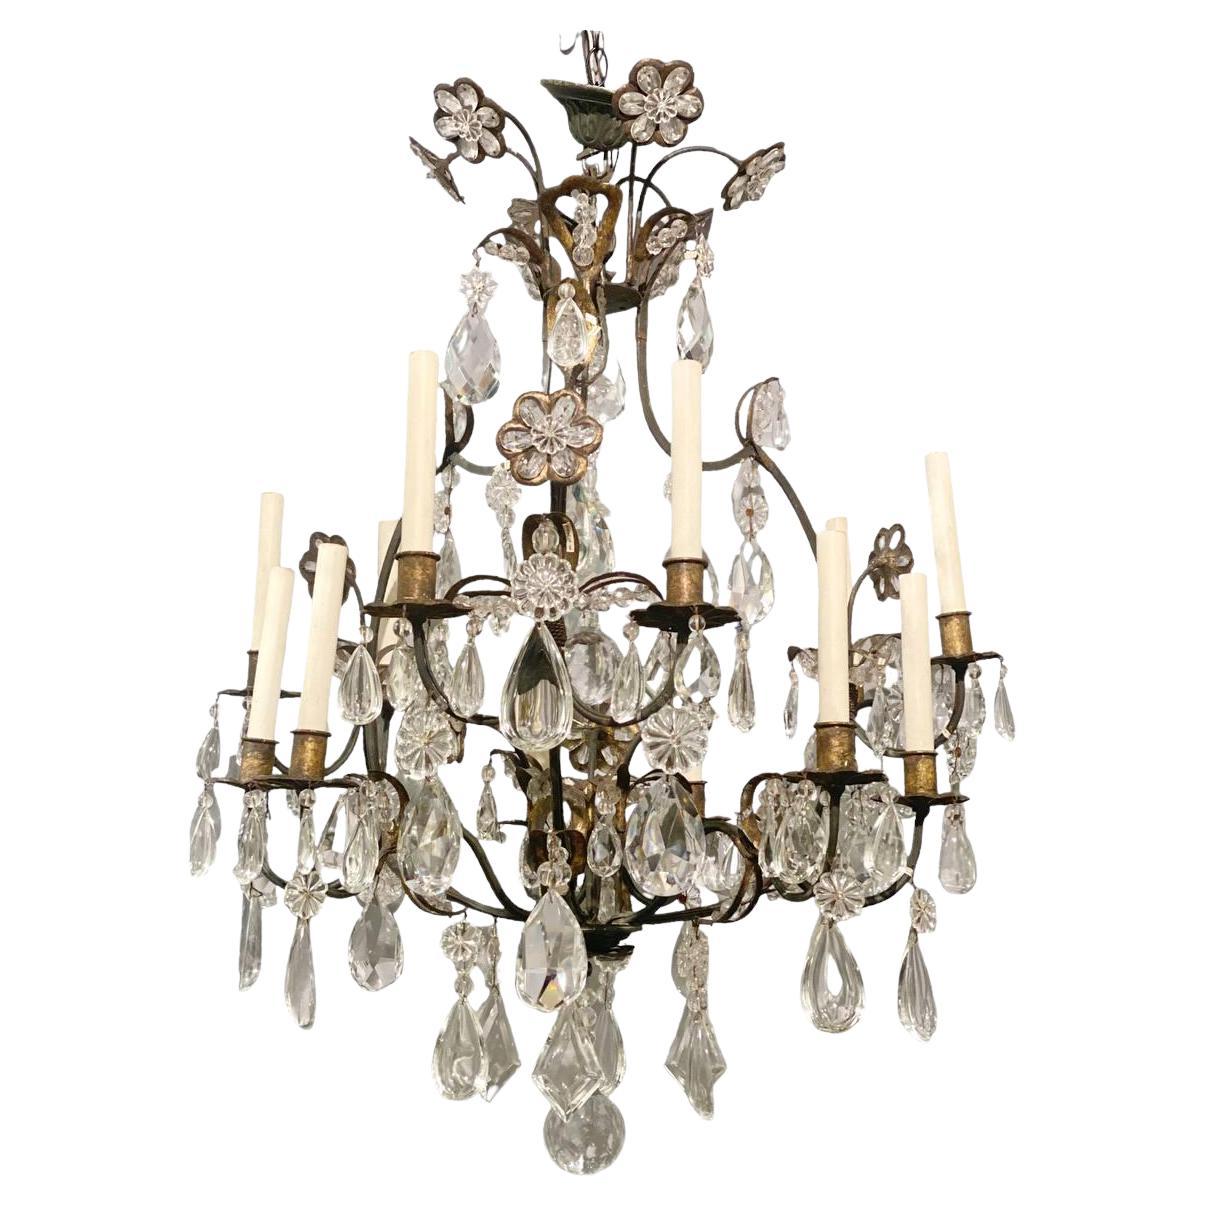 1930's French Gilt Metal and Crystal Chandelier with 12 lights For Sale